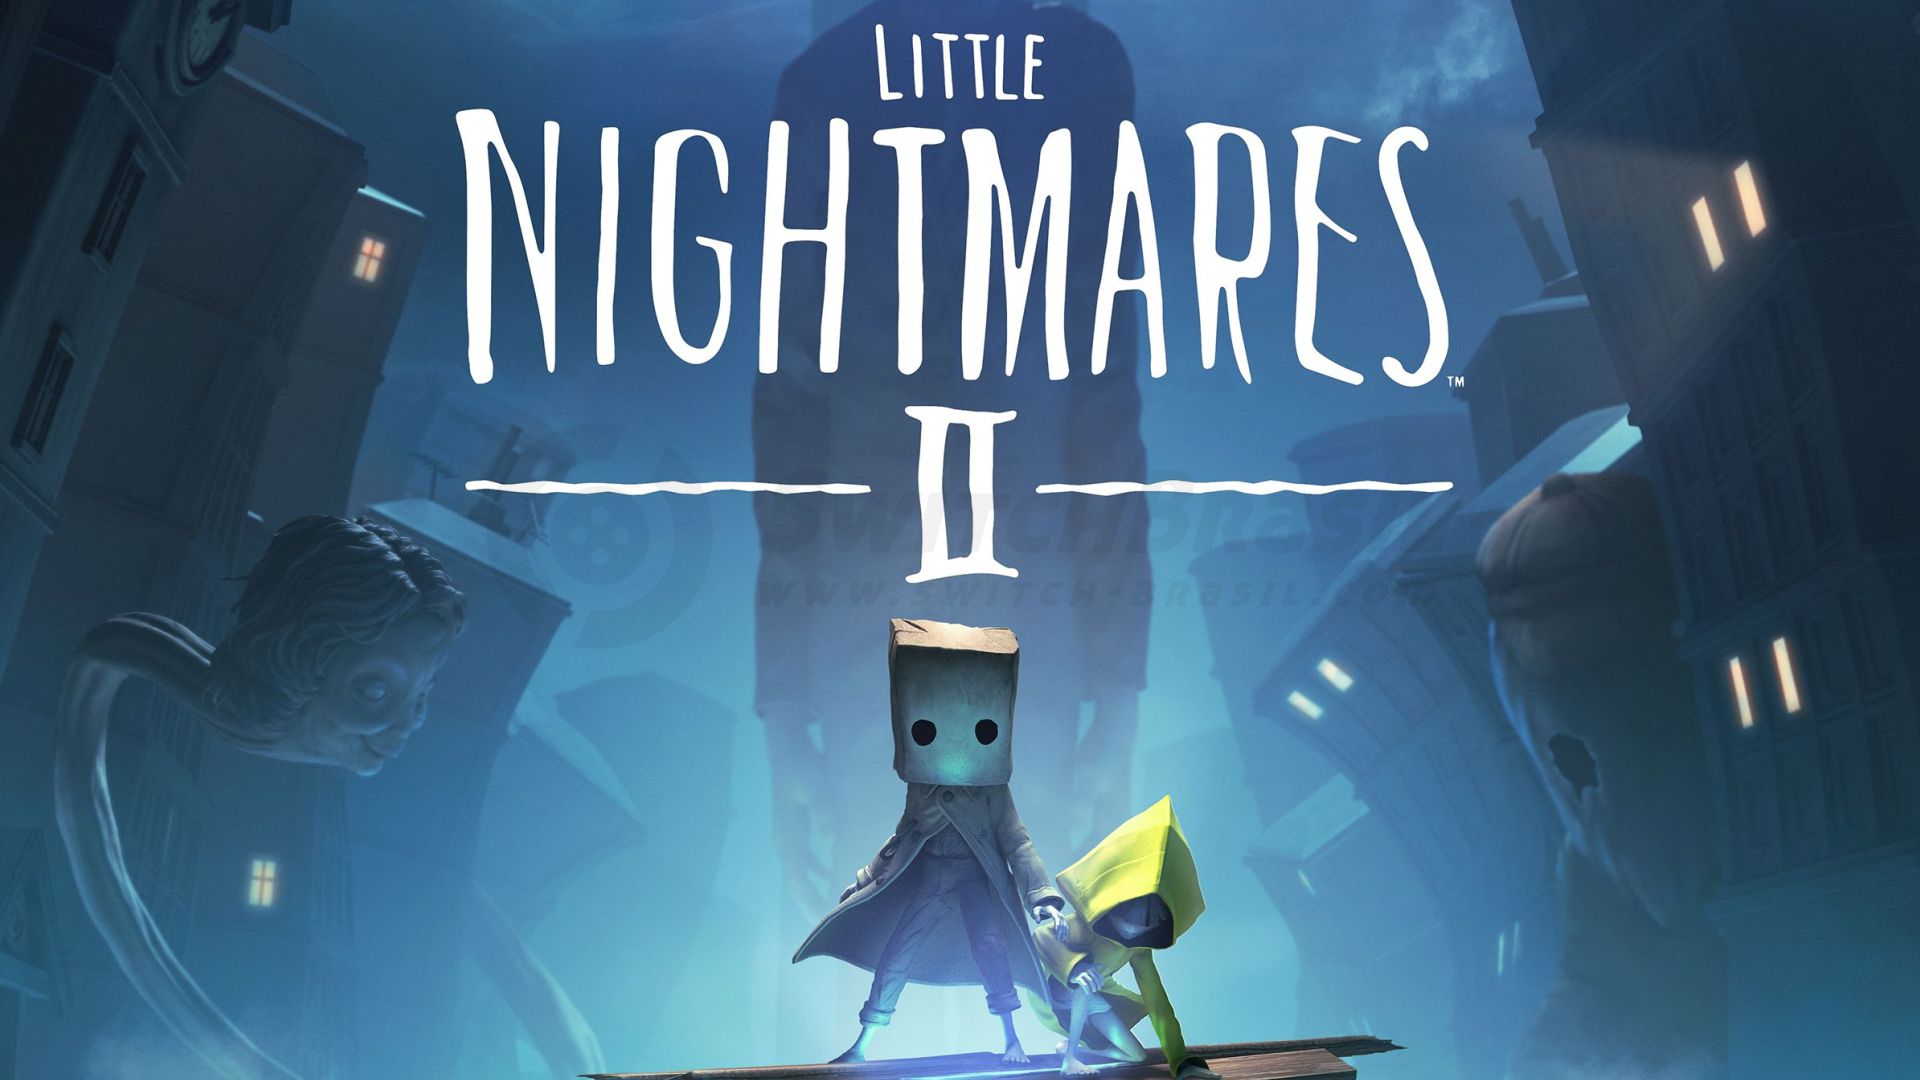 Little Nightmares 2 was included for Stadia Pro subscribers at launch

